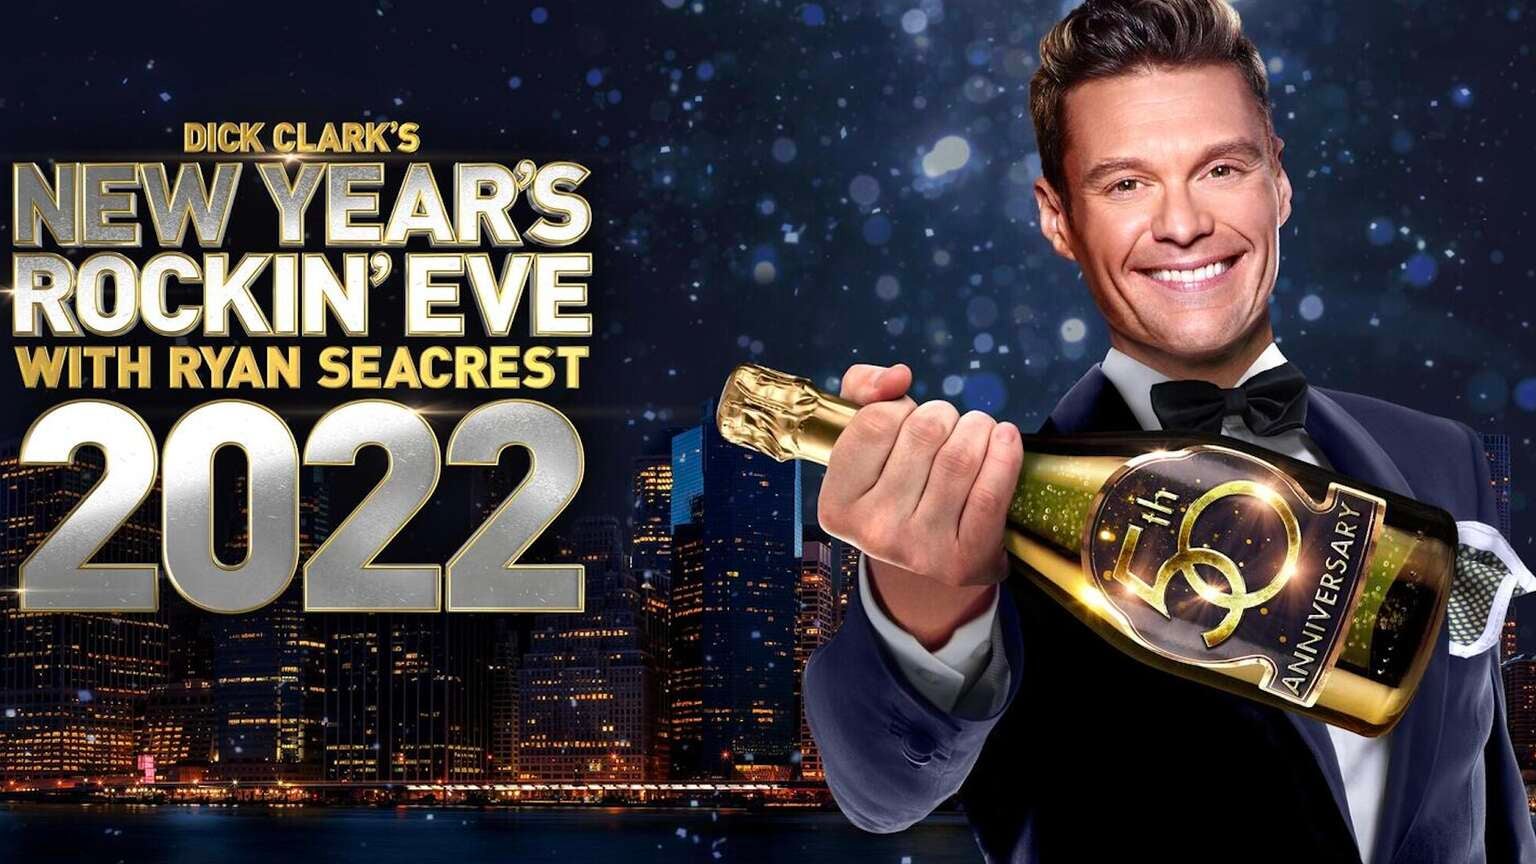 How to Watch ‘Dick Clark’s New Year’s Rockin’ Eve With Ryan Seacrest